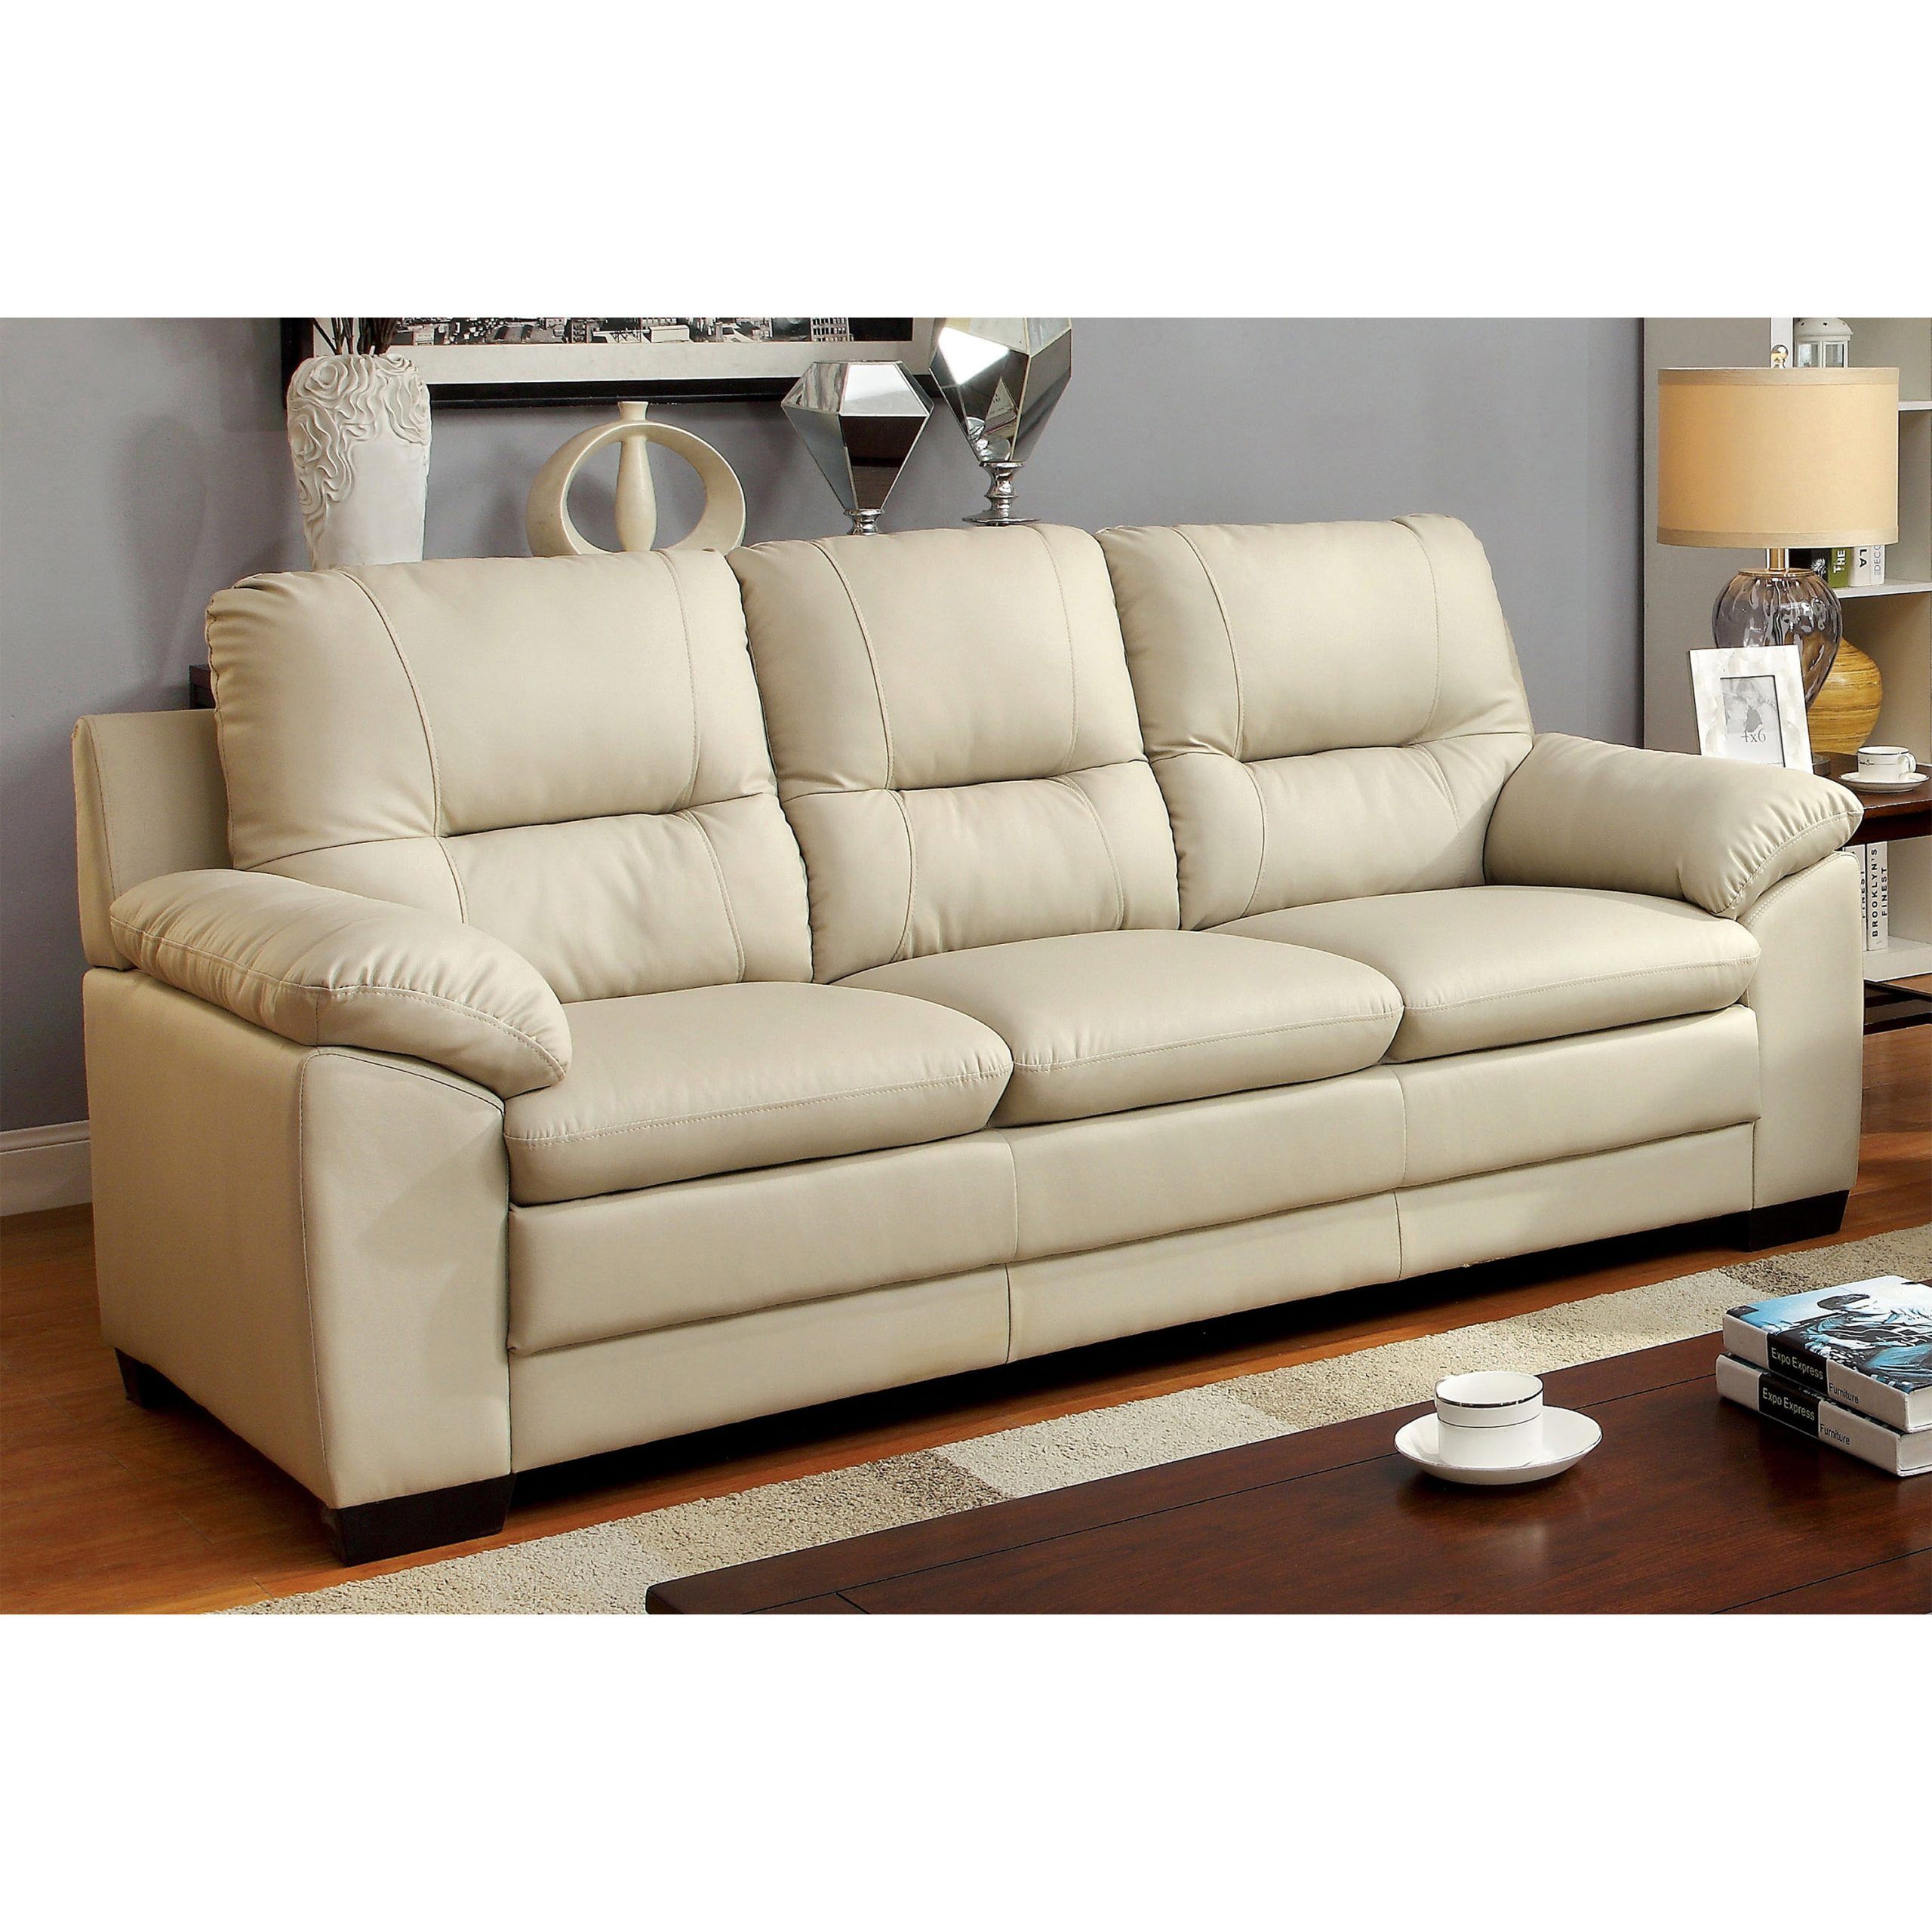 Furniture Of America Contemporary Faux Leather Truman Sofa, Ivory Intended For Faux Leather Sofas (View 2 of 21)